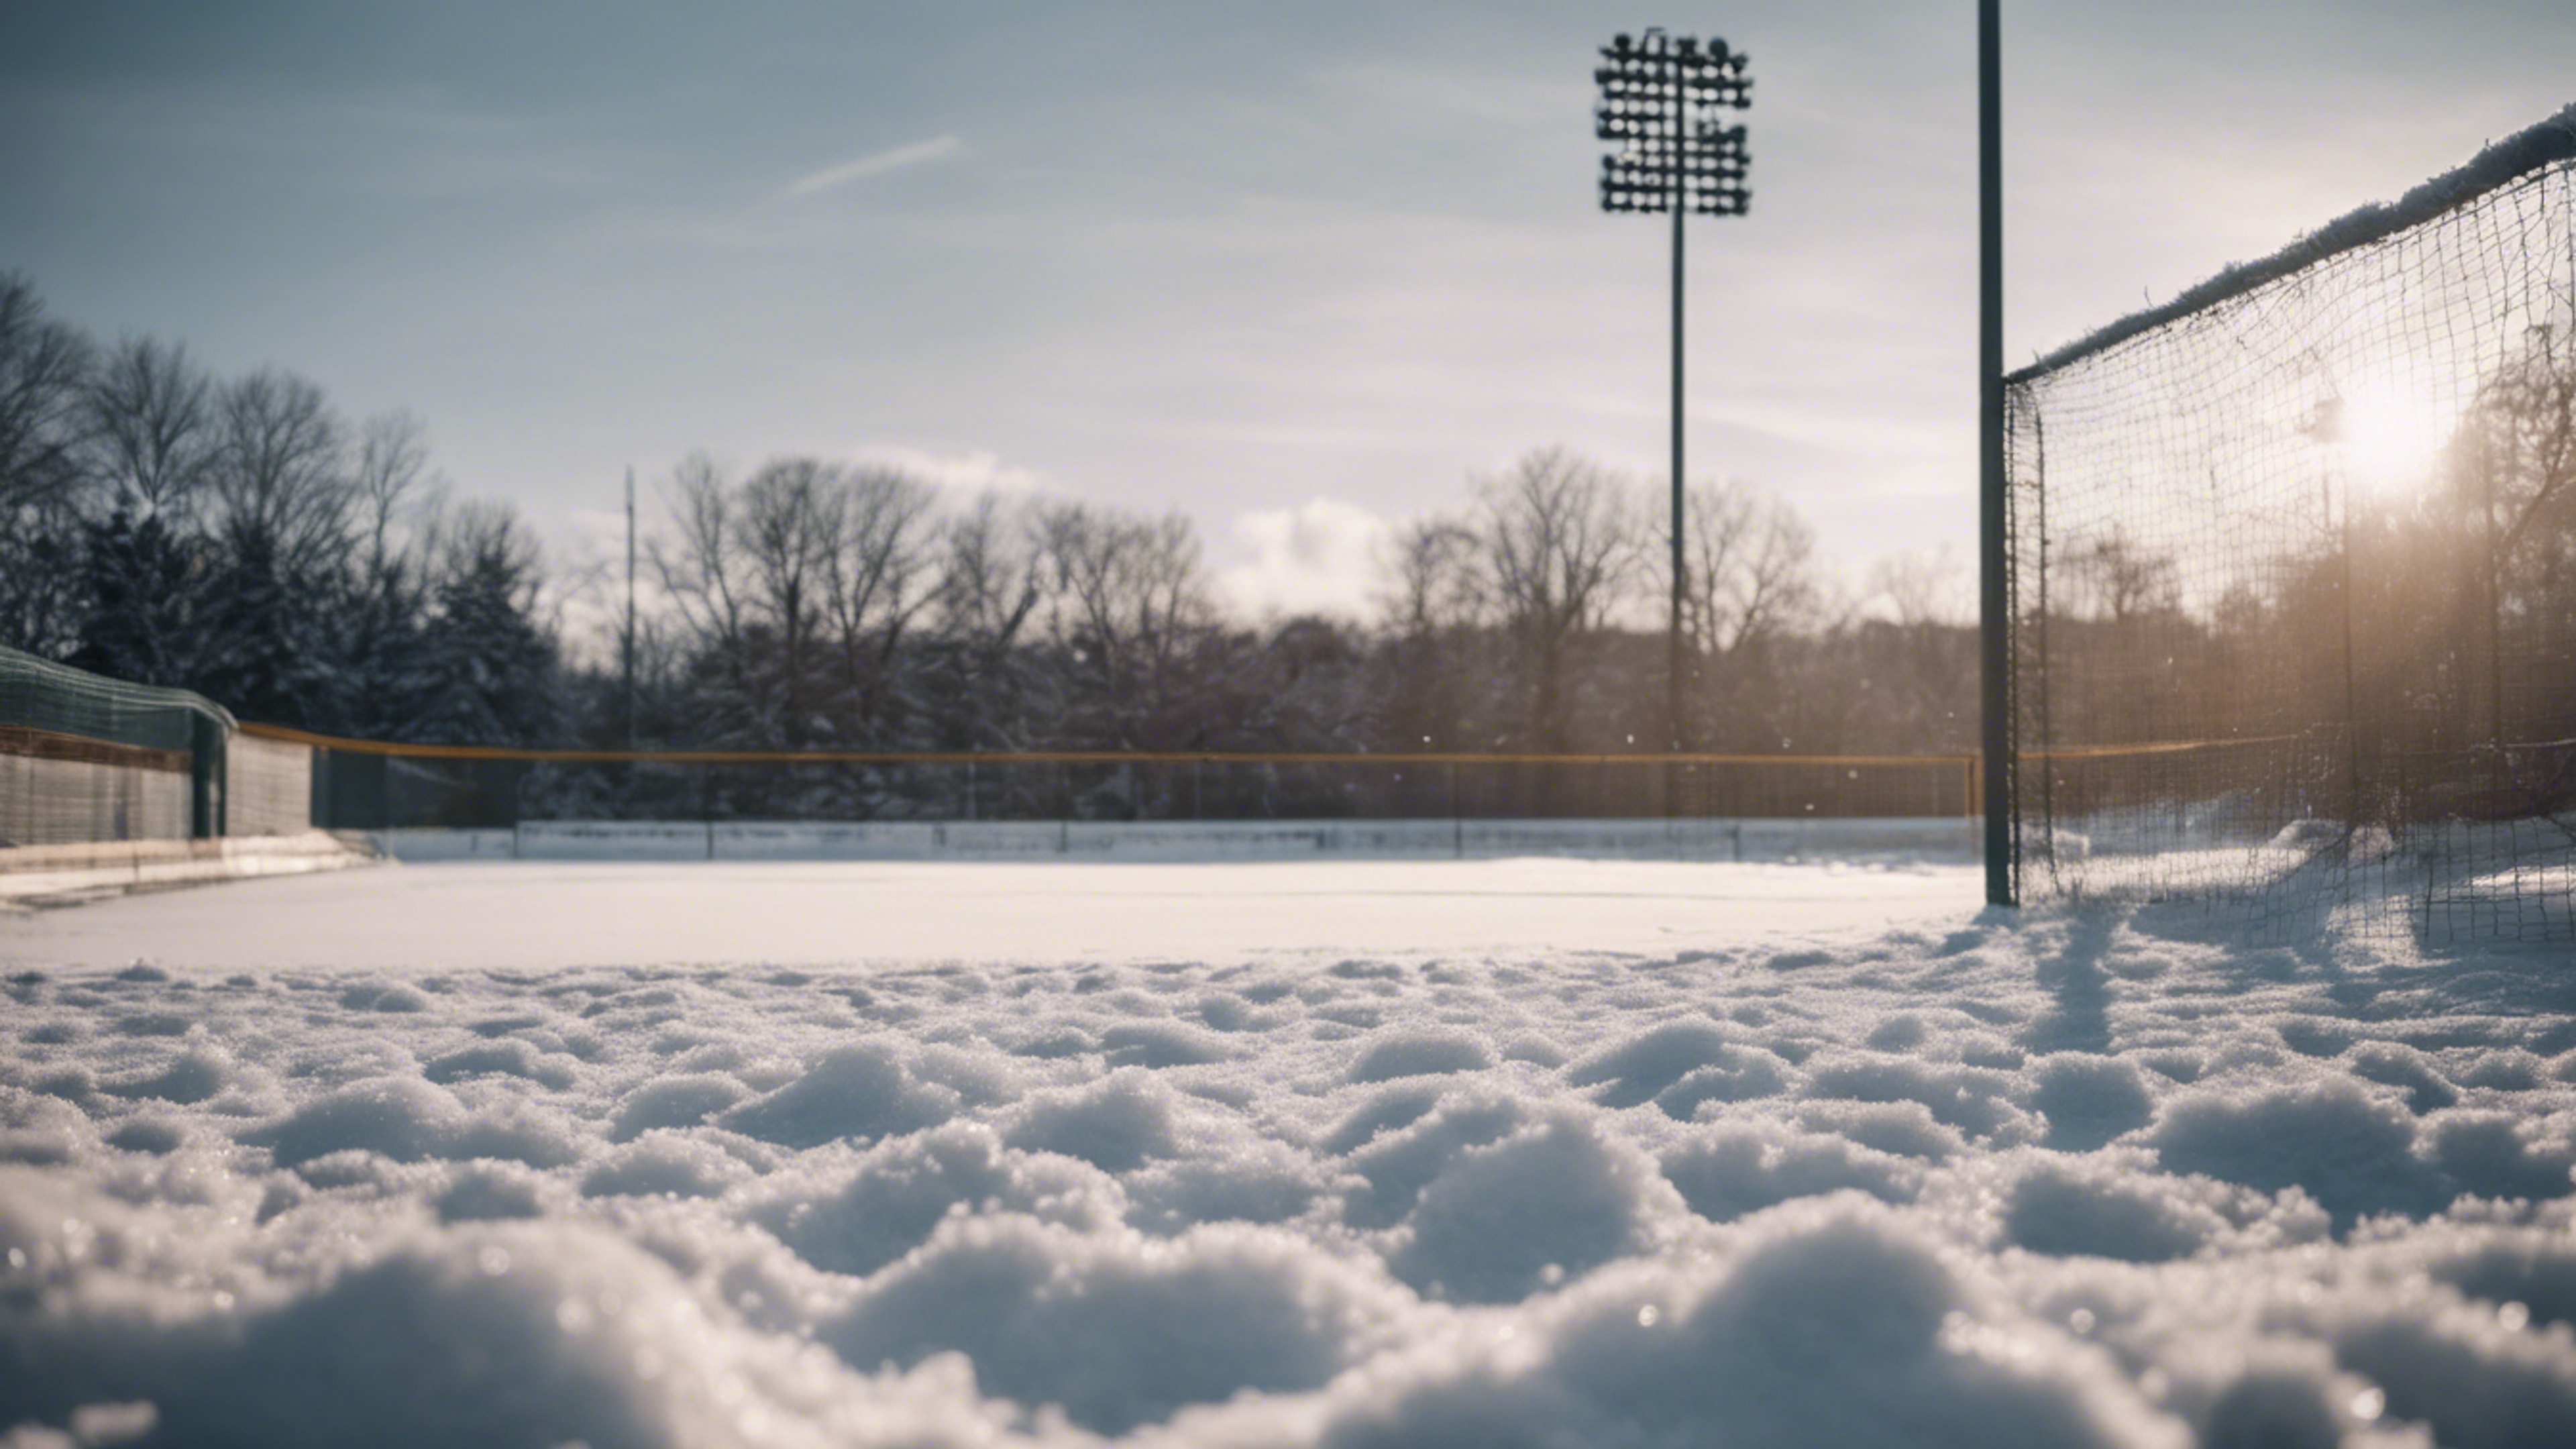 A baseball field covered in a thin layer of snow during off-season.壁紙[abf98c57f7b048239f2f]